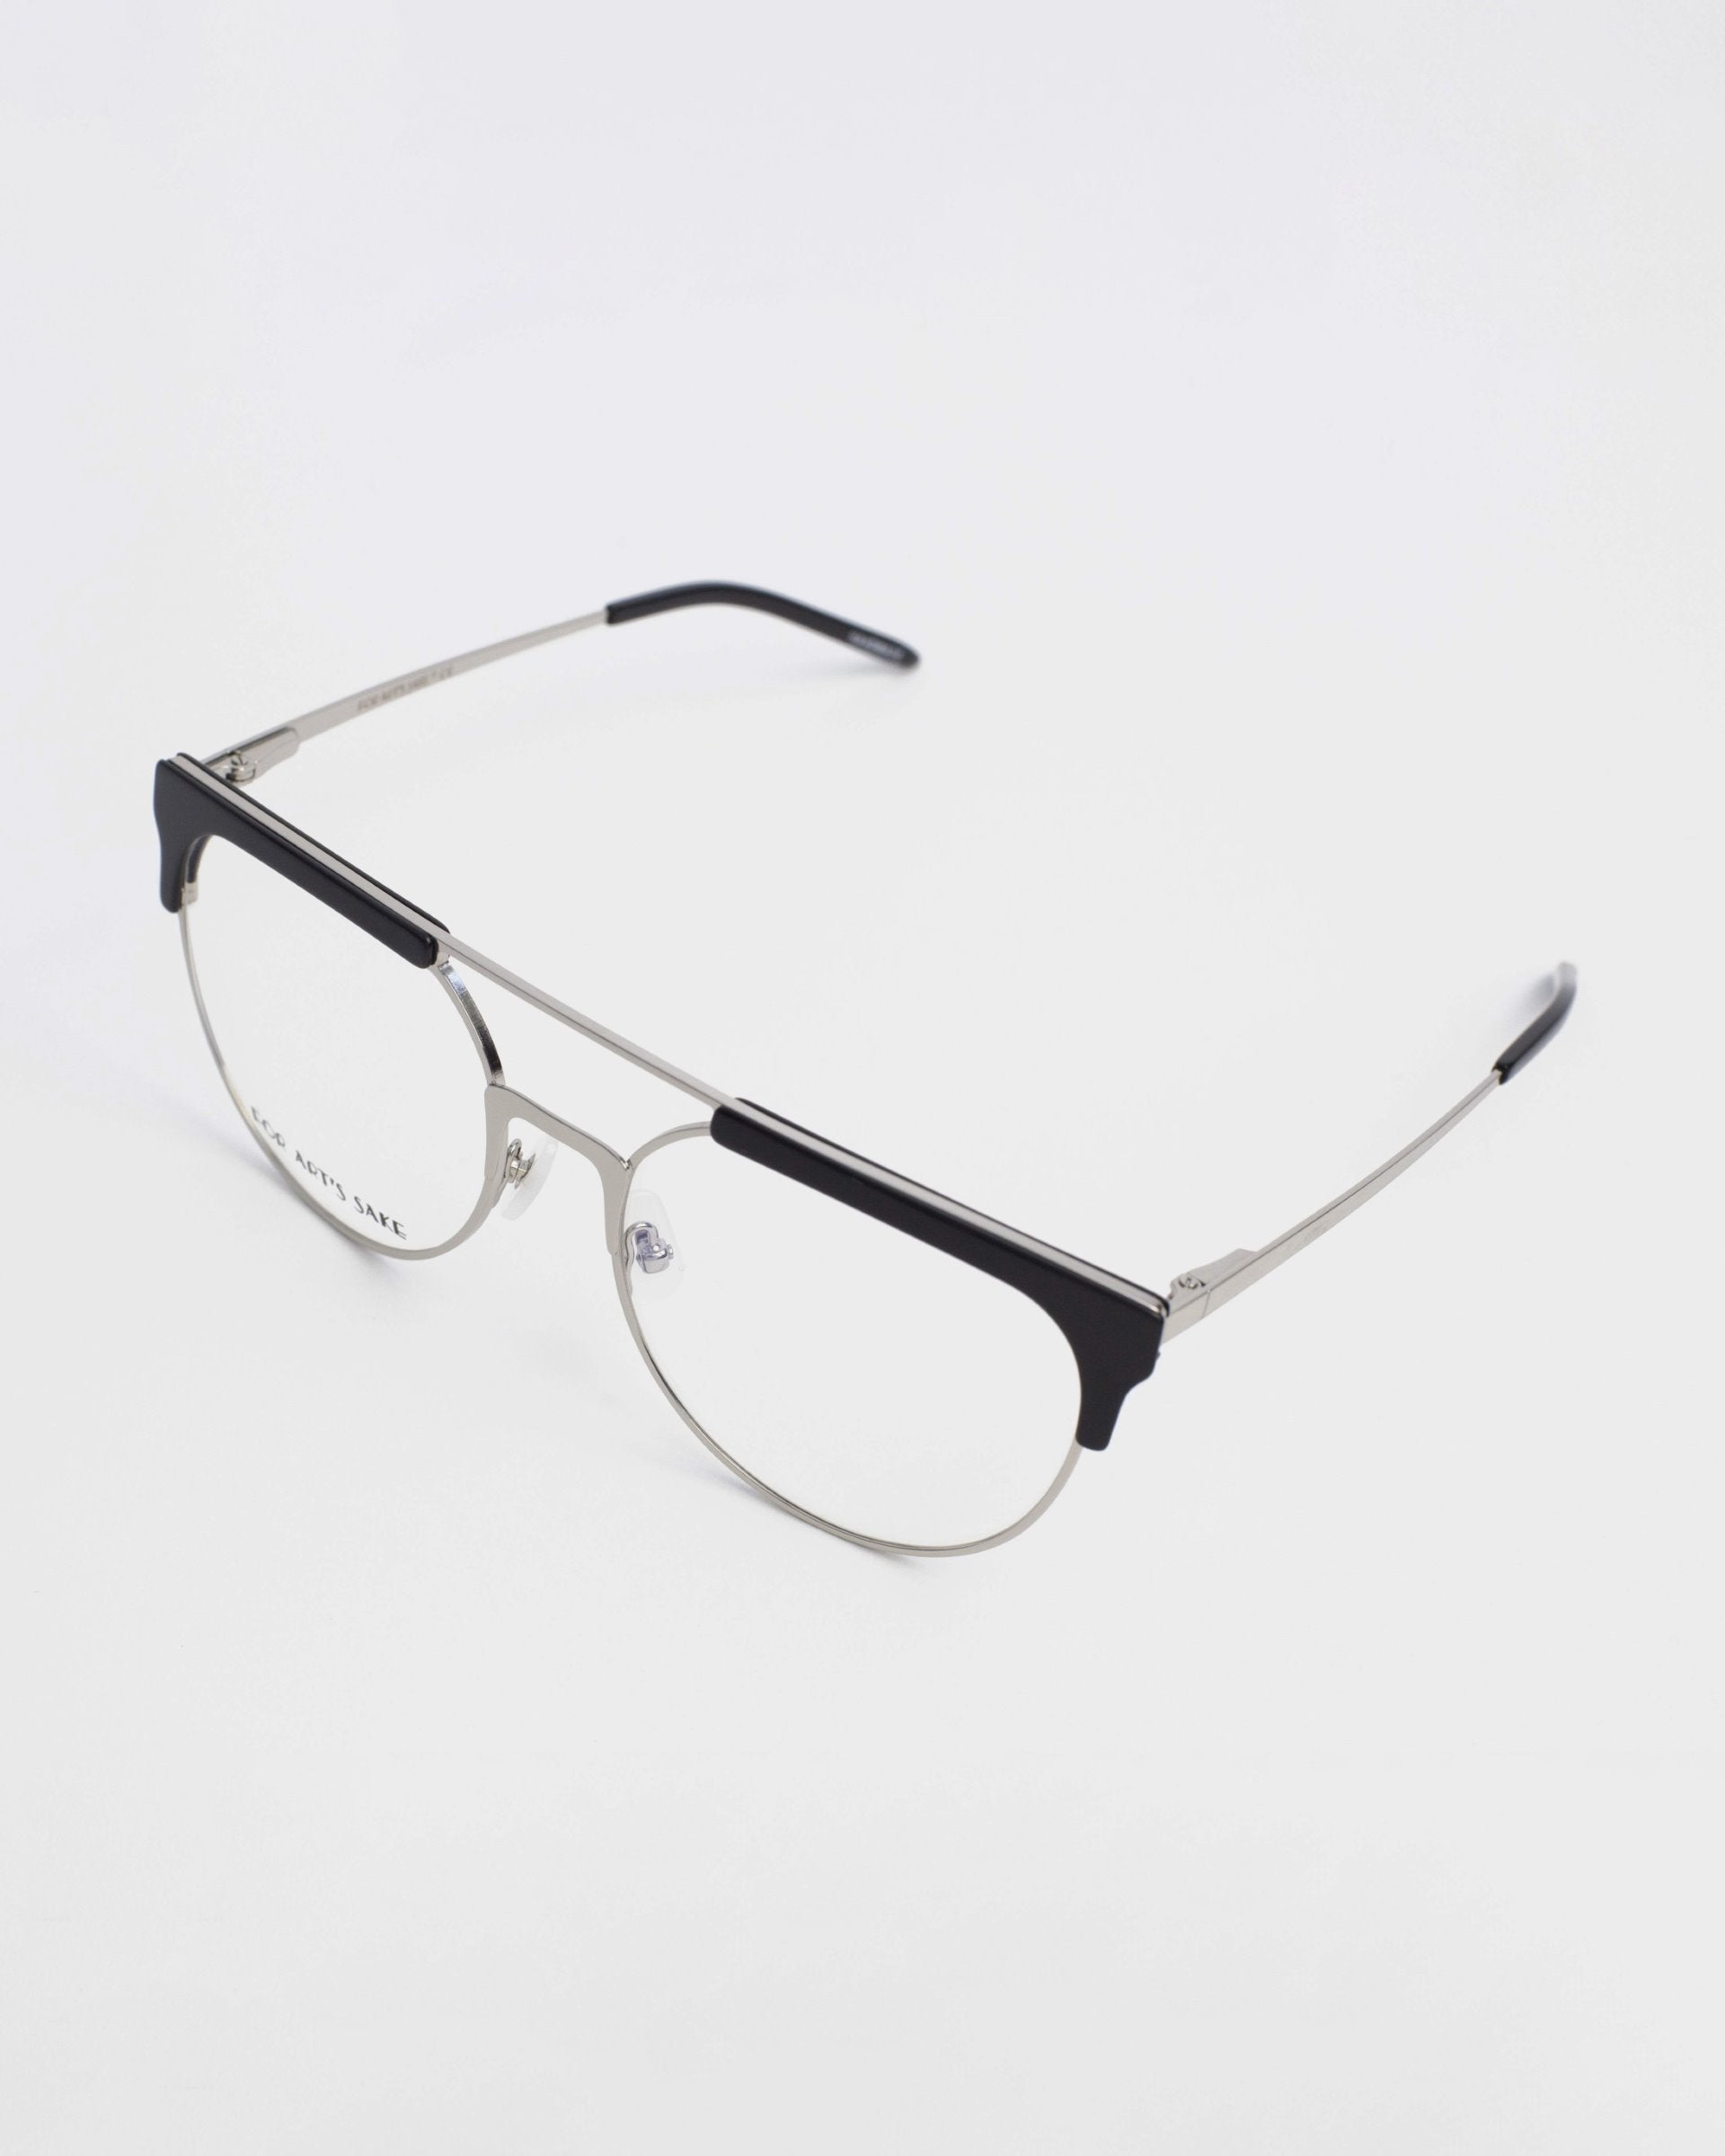 A pair of stylish Frosty prescription glasses by For Art's Sake® with a metallic frame and black accents on the top of the lenses, resting on a white surface. The design is minimalist with thin arms and clear lenses that include blue light filter technology.